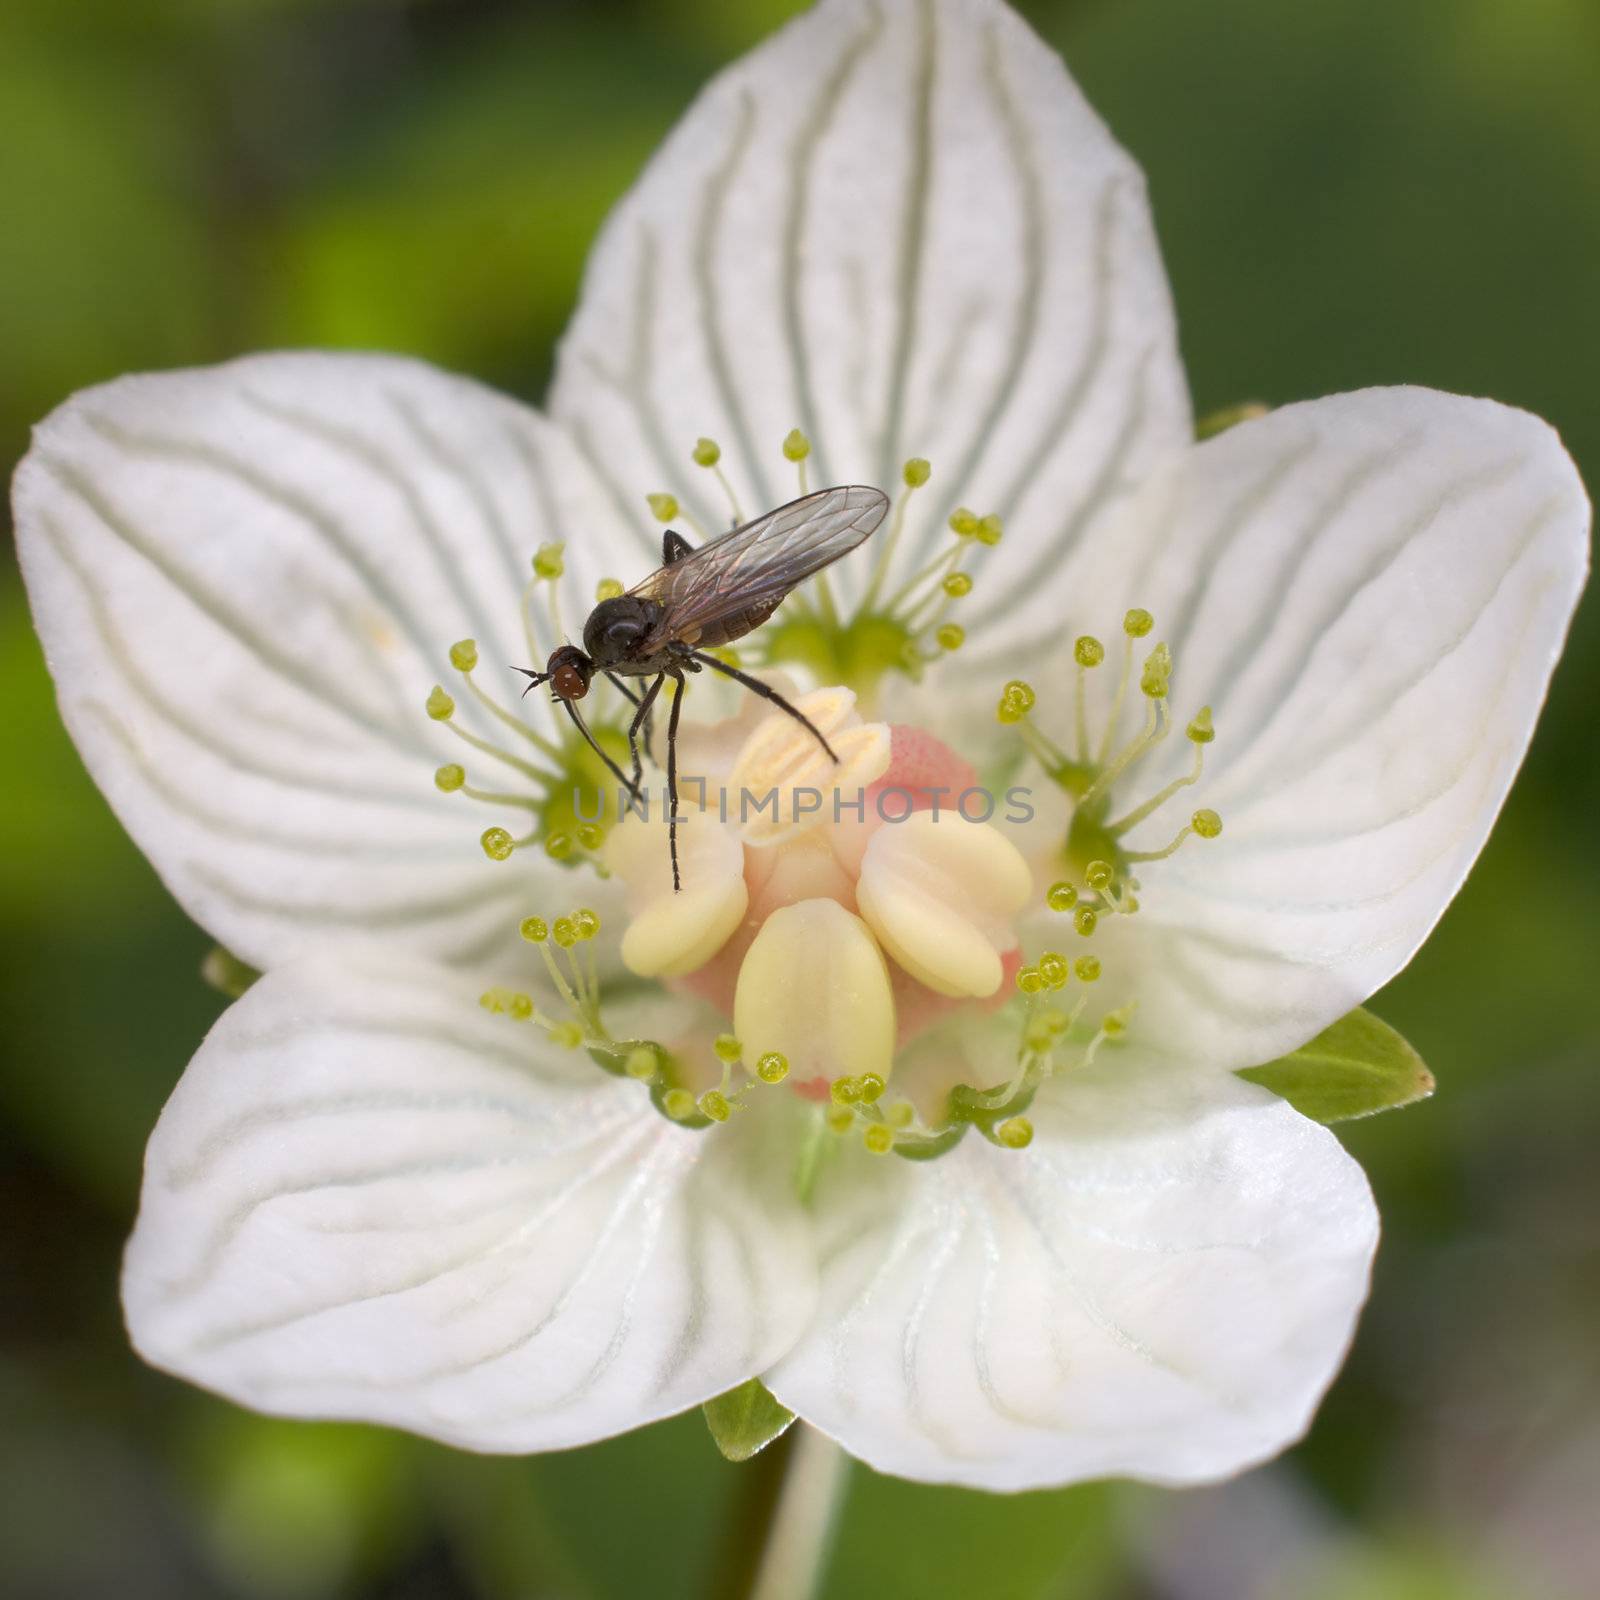 The fly on a flower by pzaxe